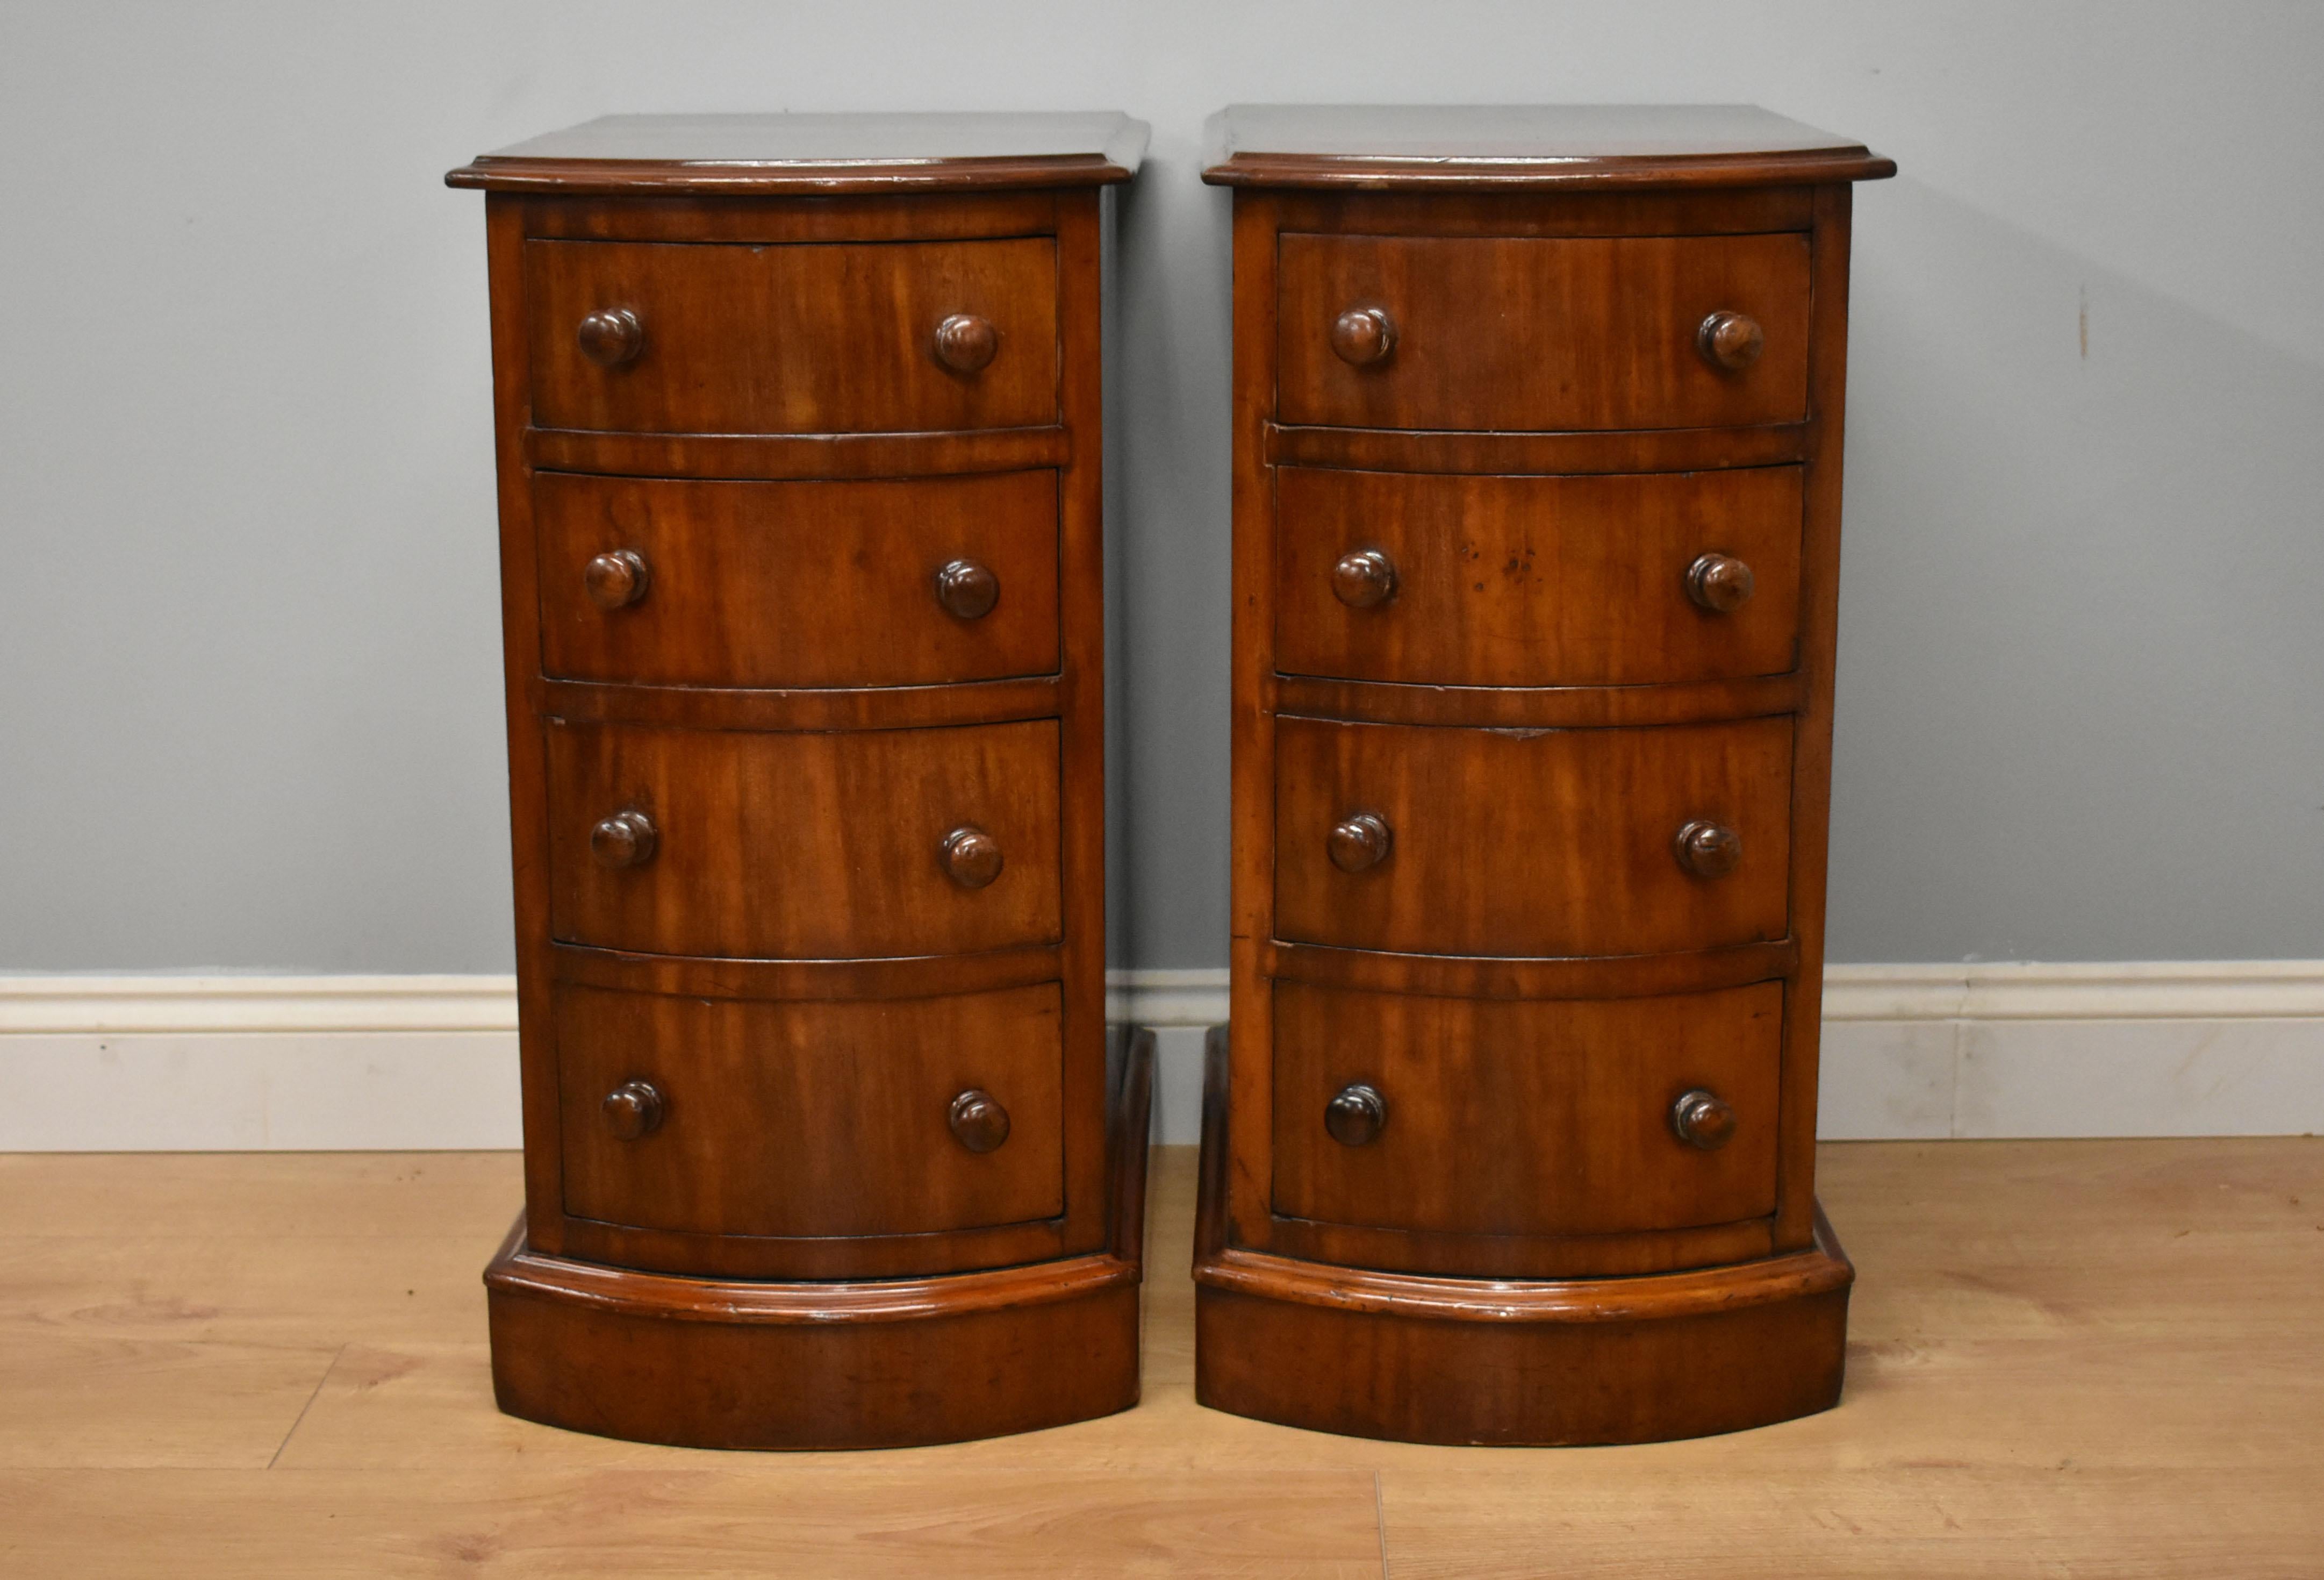 For sale is a good quality pair of 19th century Victorian mahogany bedside chests, being bow front in form and having four graduated drawers, each with turned handles, standing on a plinth base, both of the chests are in good condition, with minor